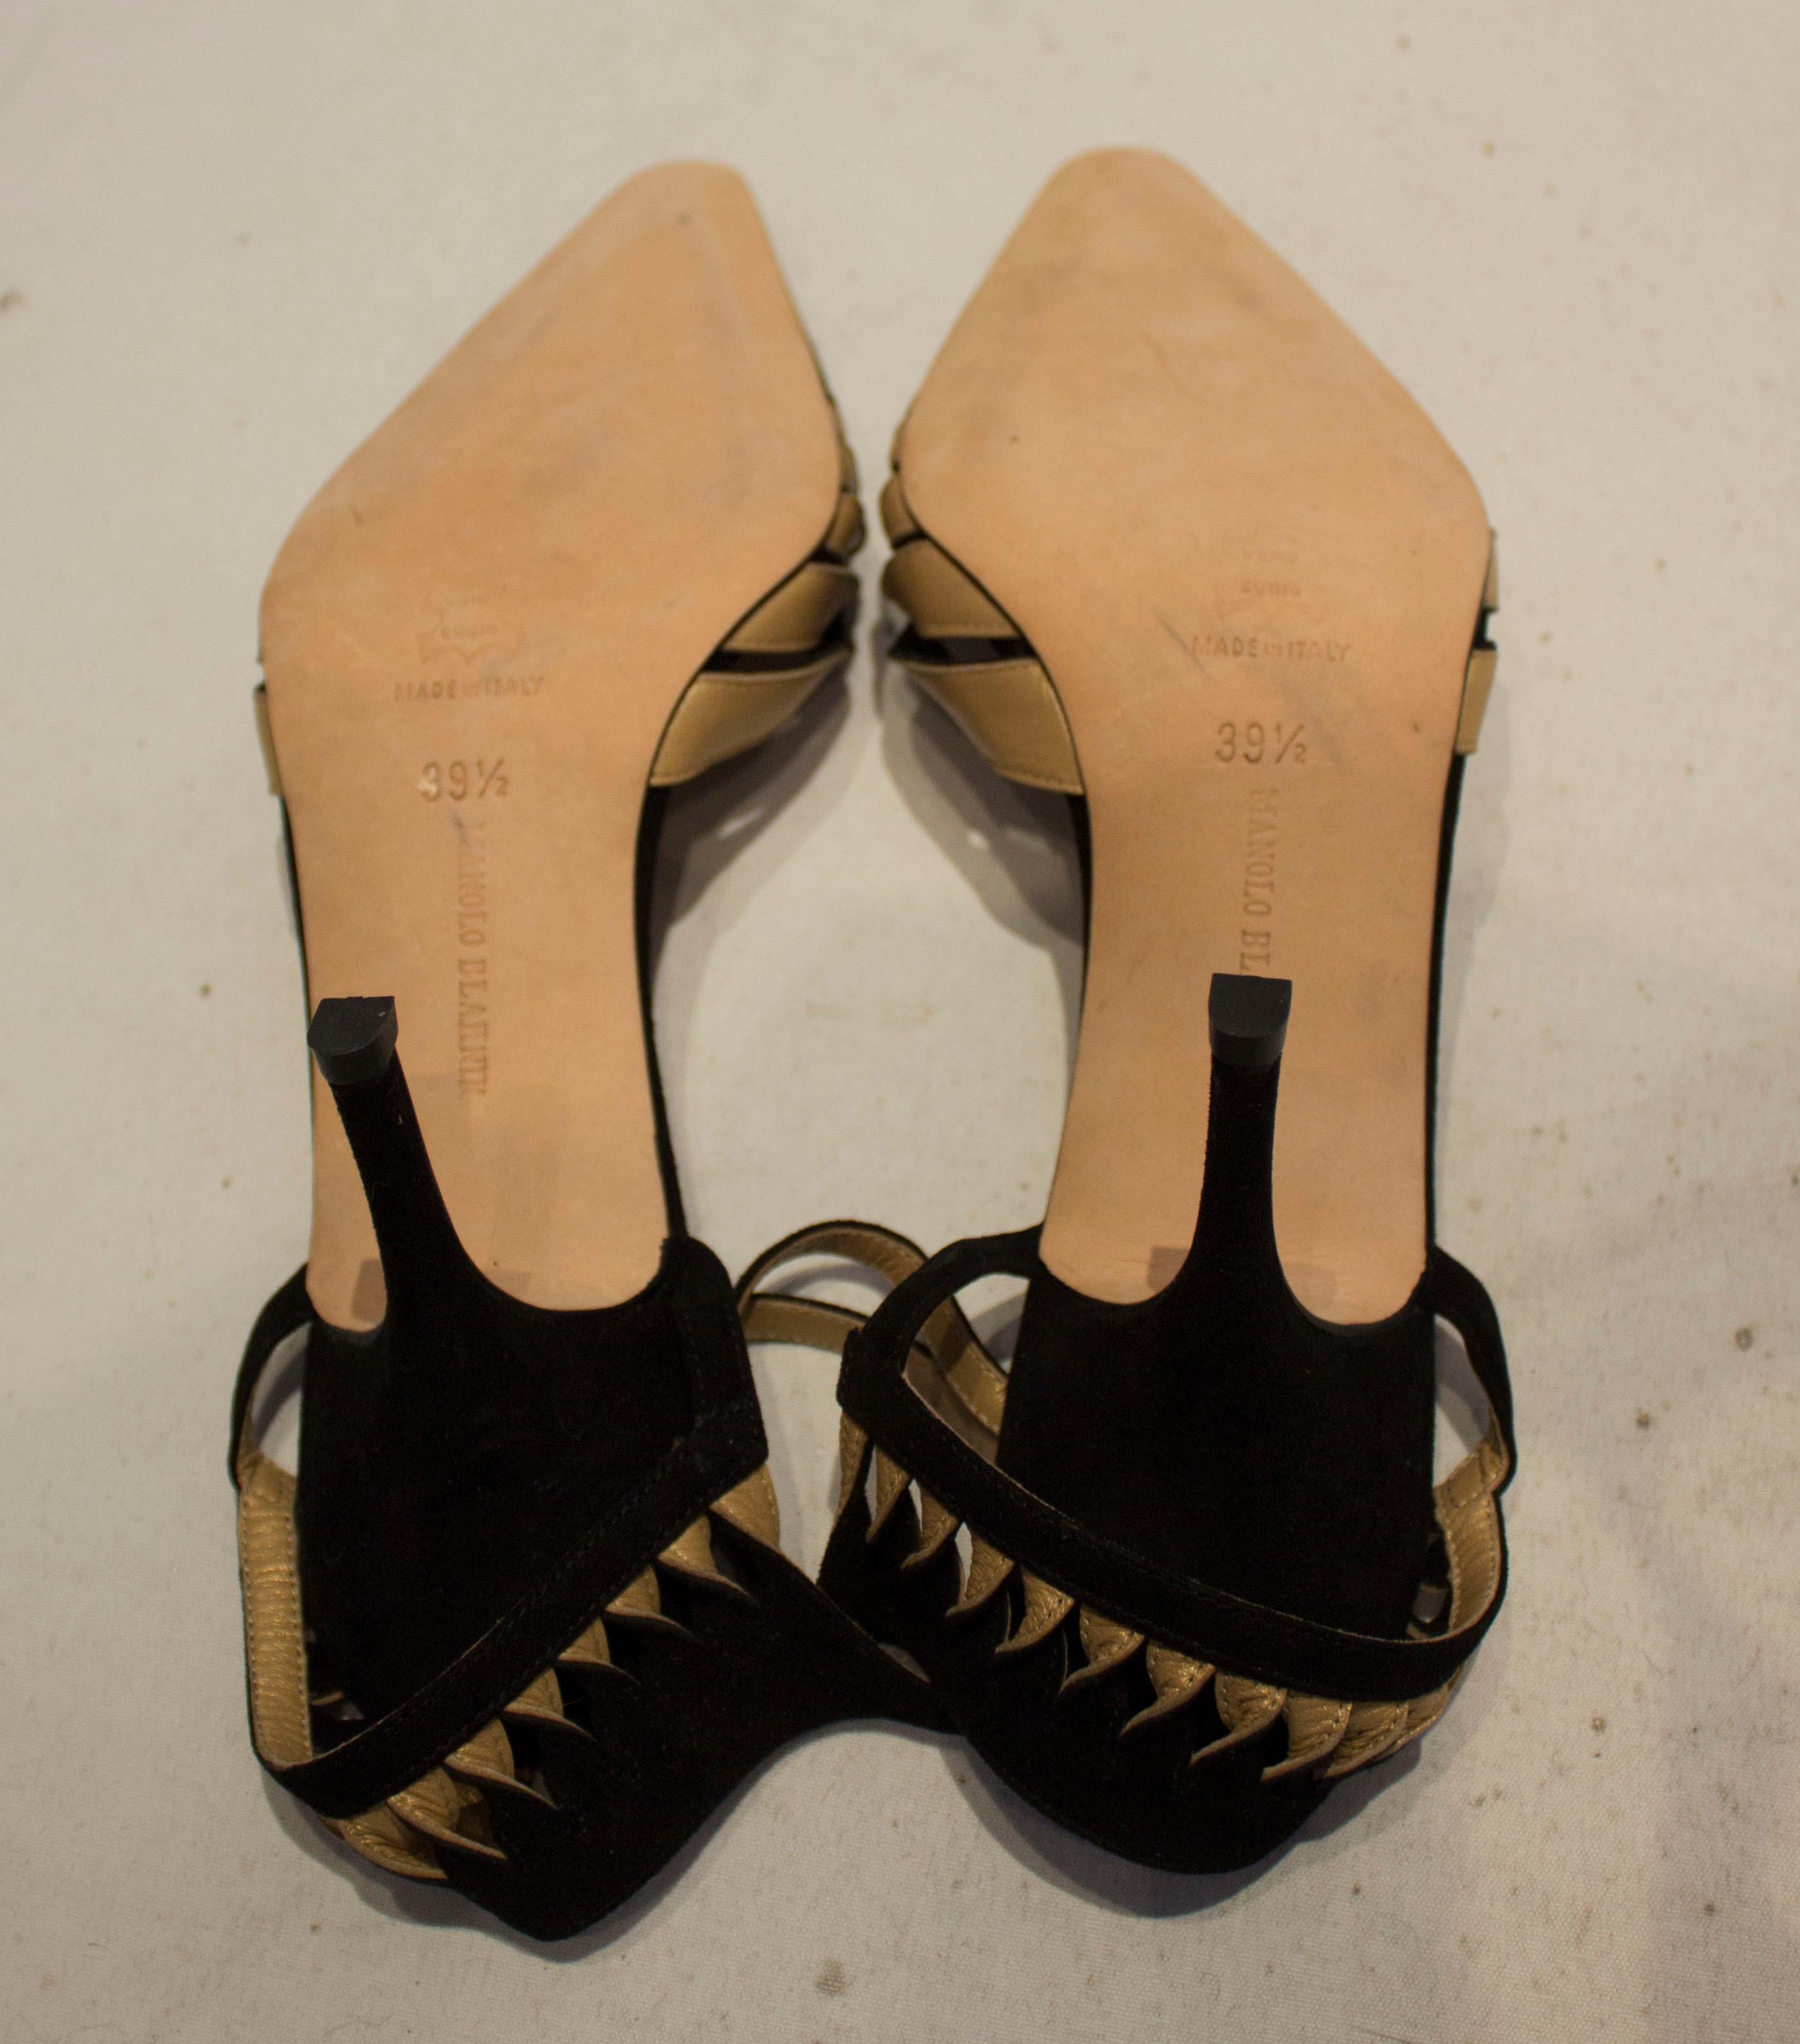 Manolo Blahnik Suede and Leather Shoes 1